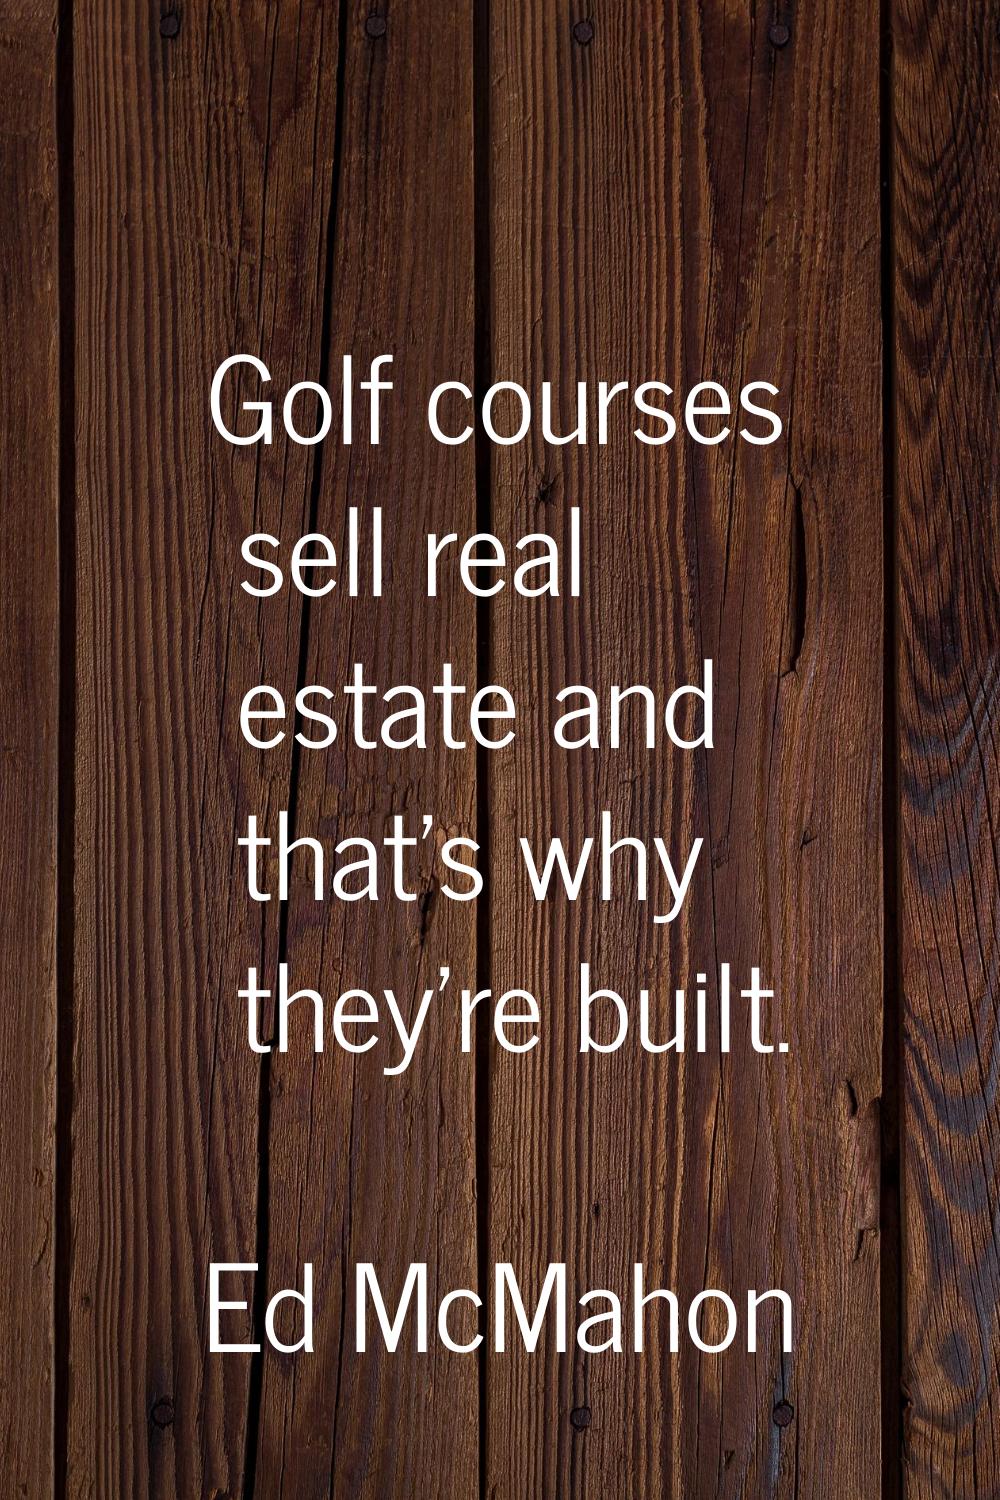 Golf courses sell real estate and that's why they're built.